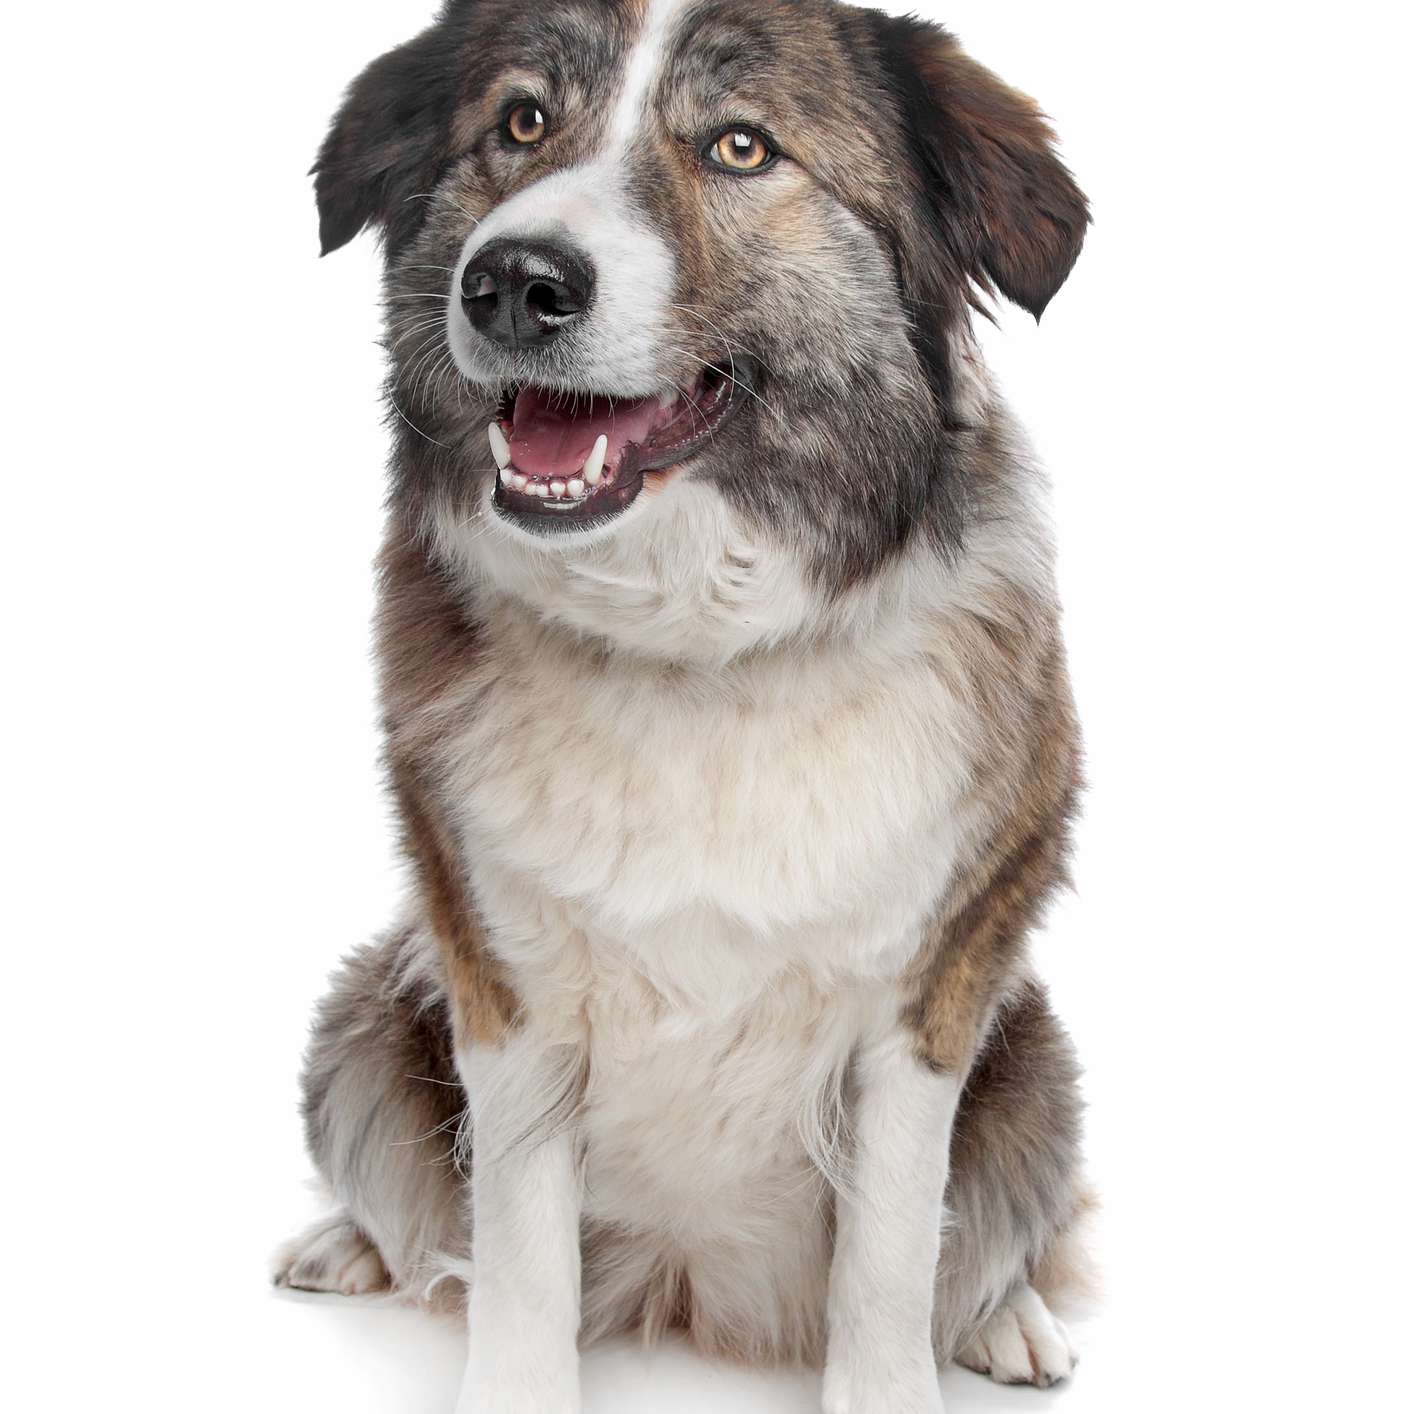 Aidi dog with white markings sitting with its mouth open in front of a white background.